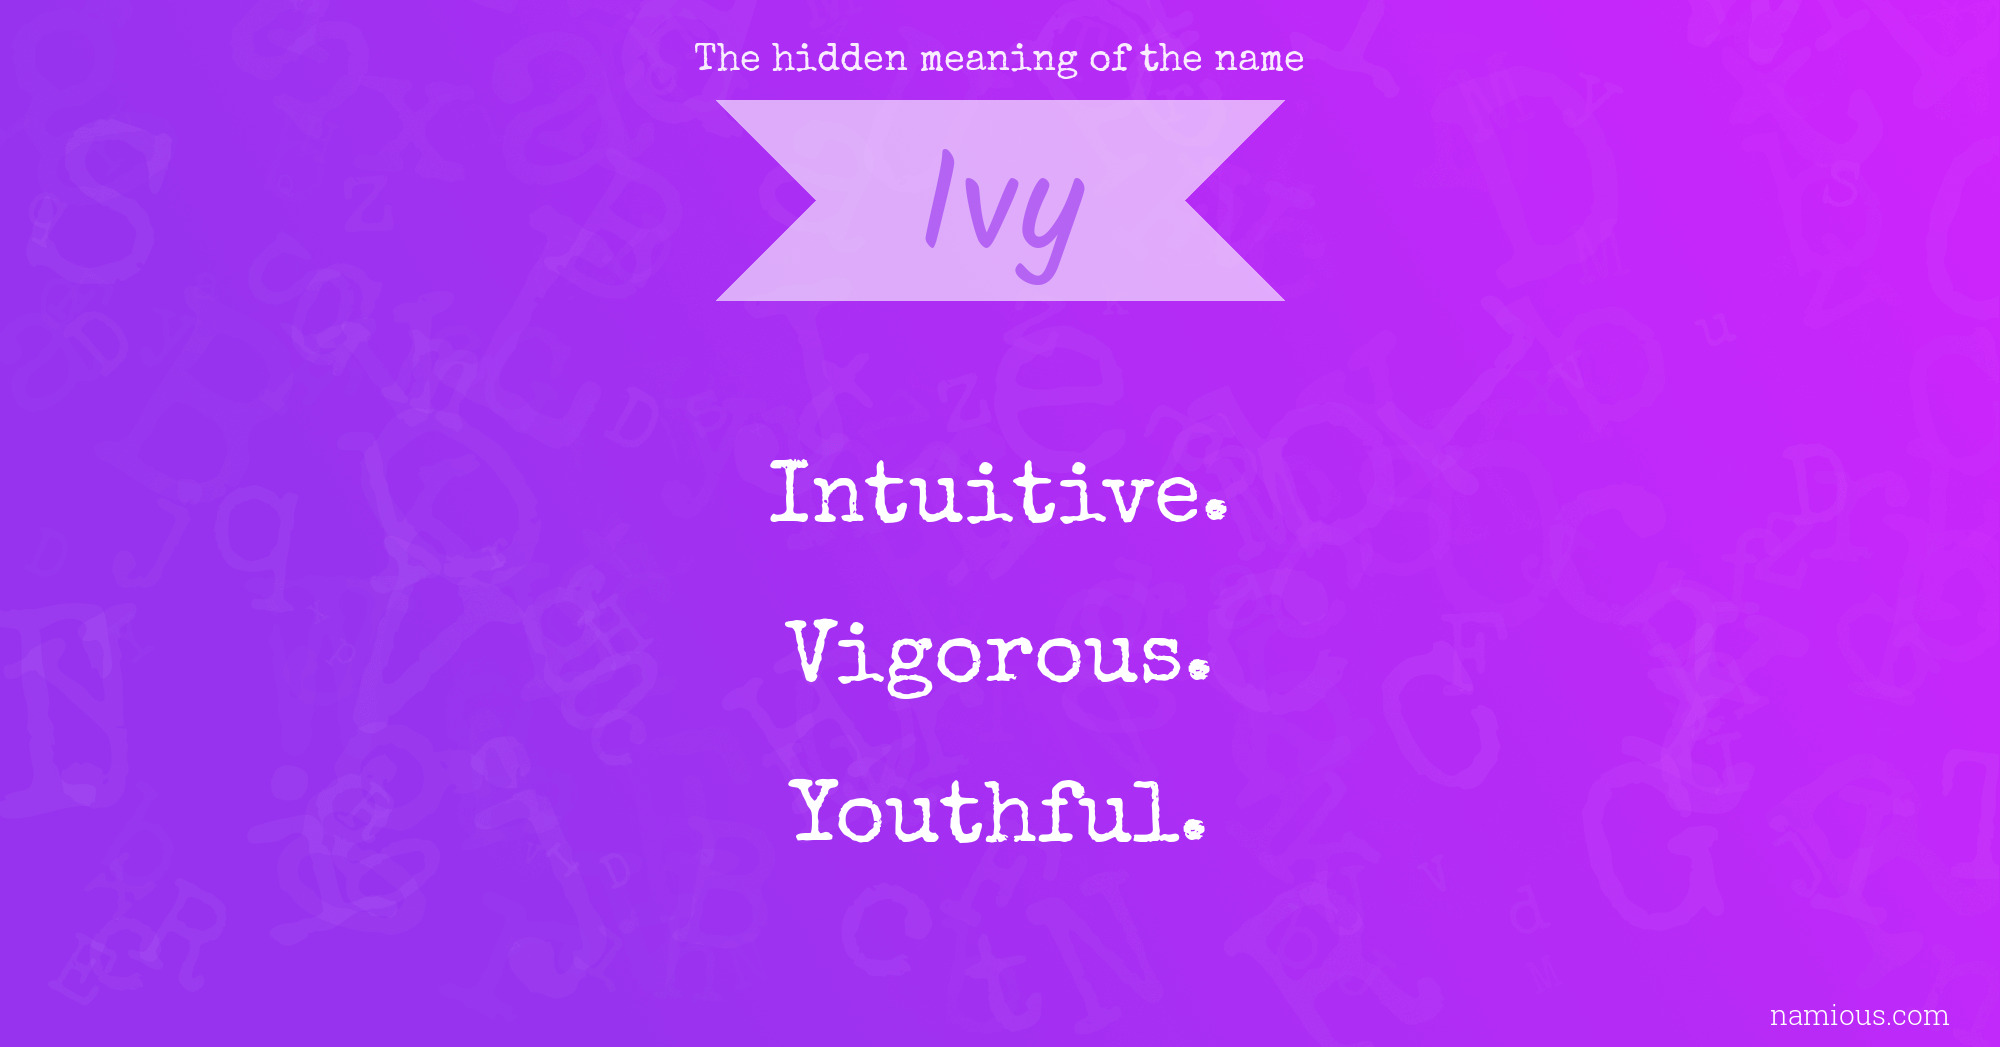 The hidden meaning of the name Ivy